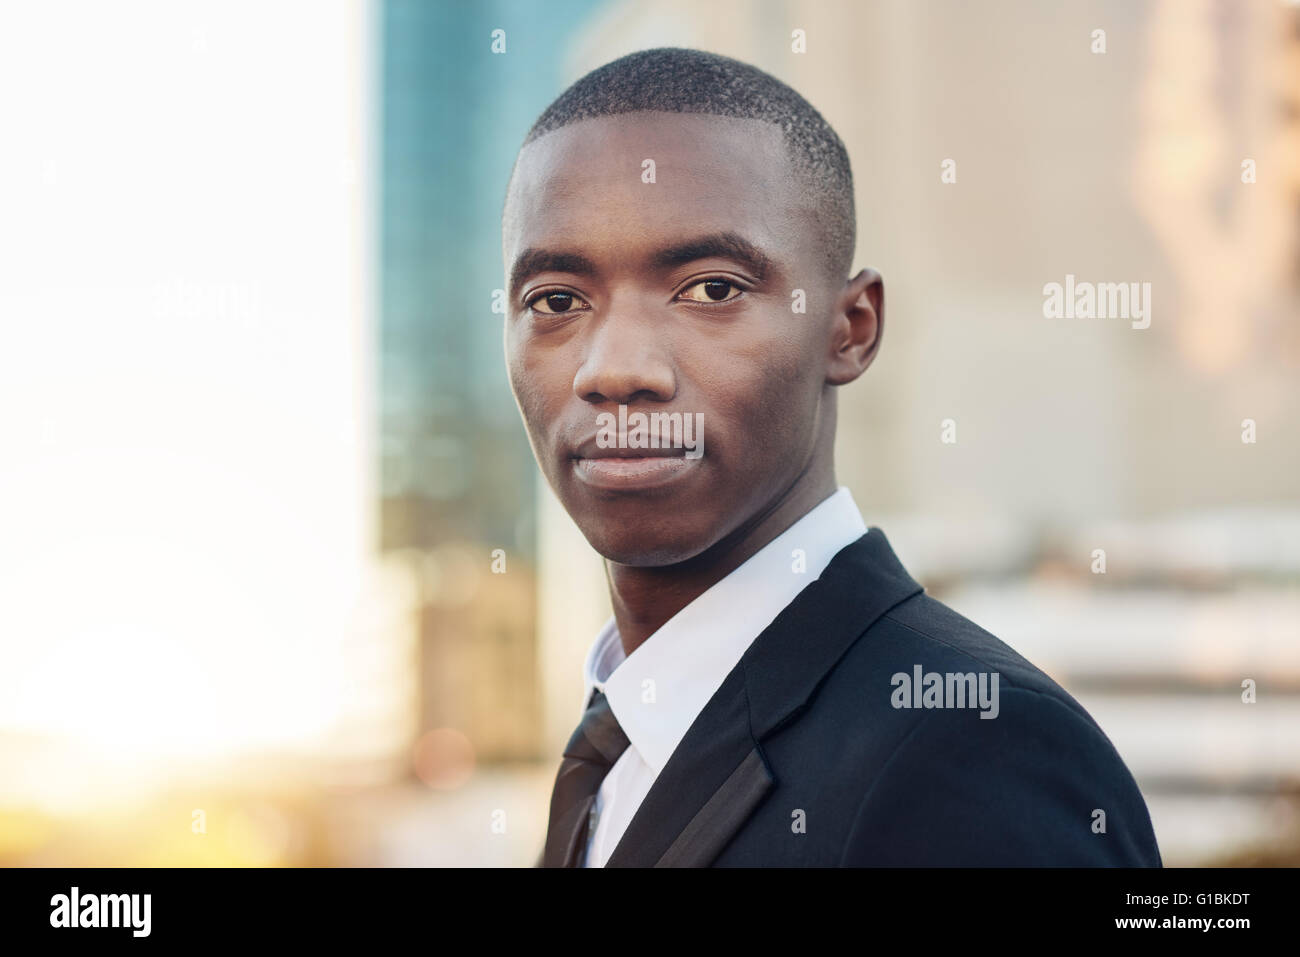 Closeup head and shoulders portrait of a confident entrepreneur of African descent wearing a suit and tie standing outdoors look Stock Photo